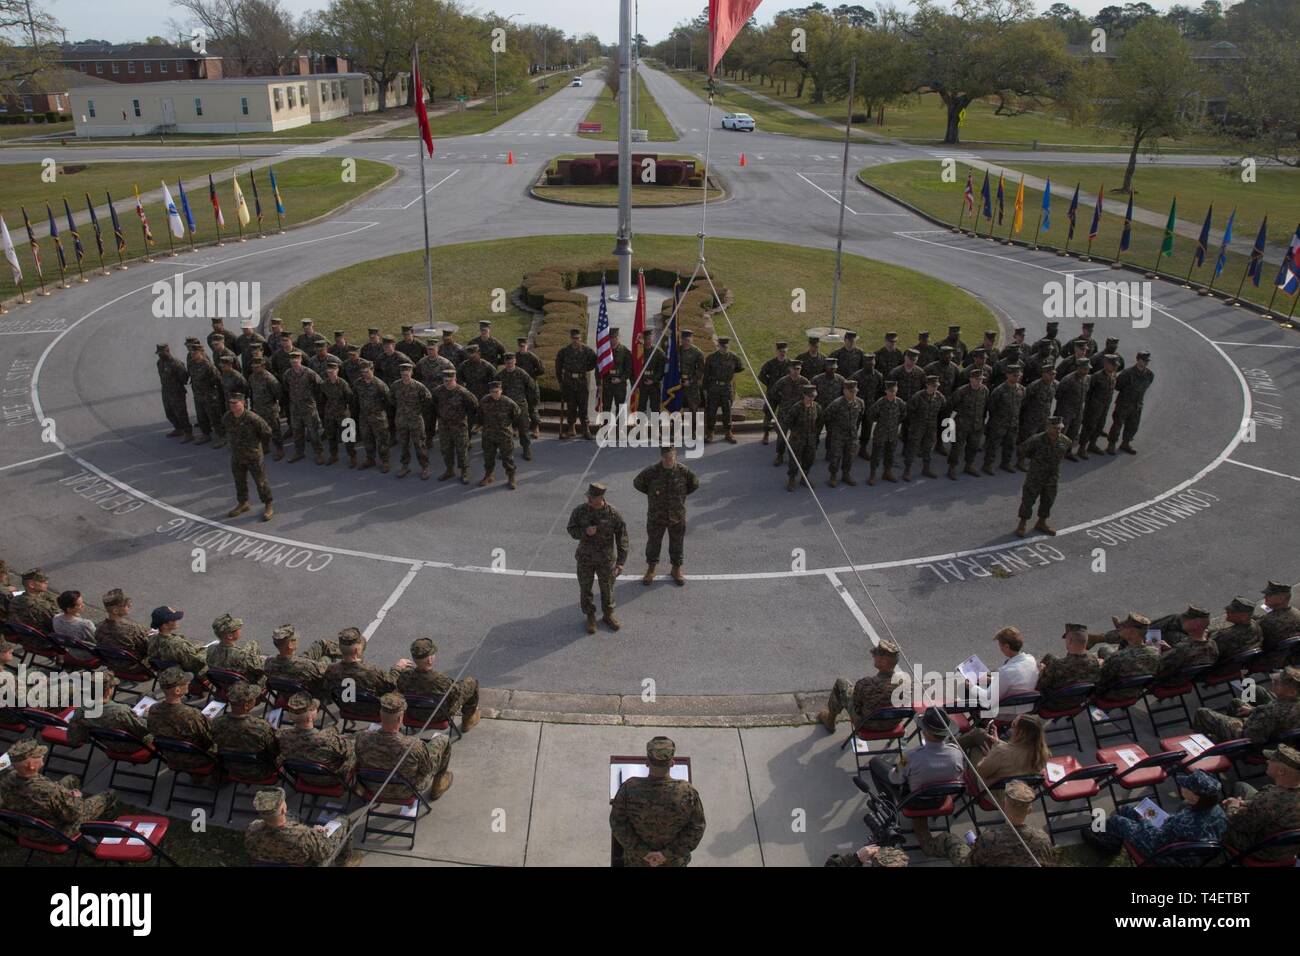 U.S. Sailors with 2nd Marine Logistics Group (MLG) stand in formation during a change of charge ceremony at Camp Lejeune, North Carolina, April 4, 2019.  Master Chief Petty Officer Christopher Rebana was relieved by Master Chief Petty Officer Richard A. Jackson as command master chief of 2nd MLG. Stock Photo